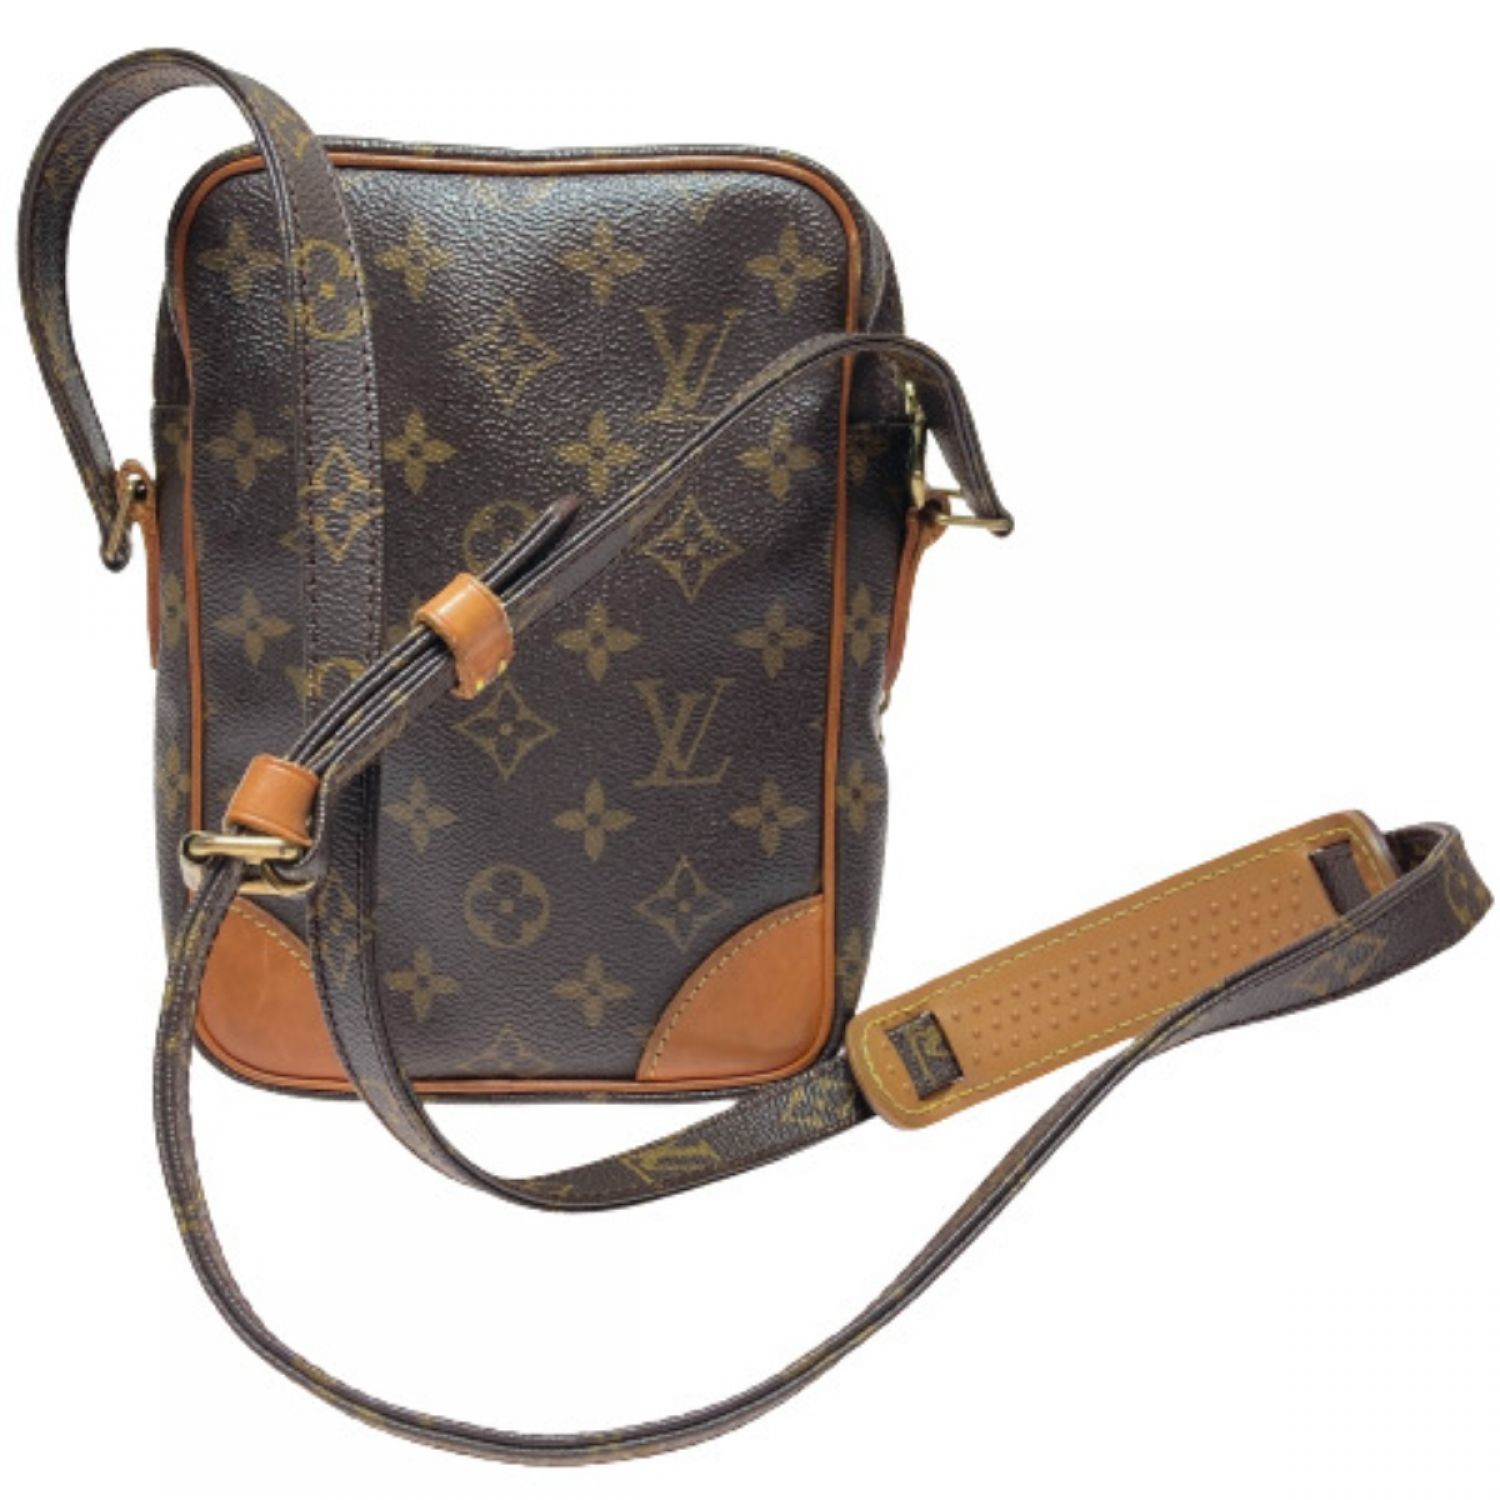 Louis Vuitton　ルイヴィトン　アマゾン